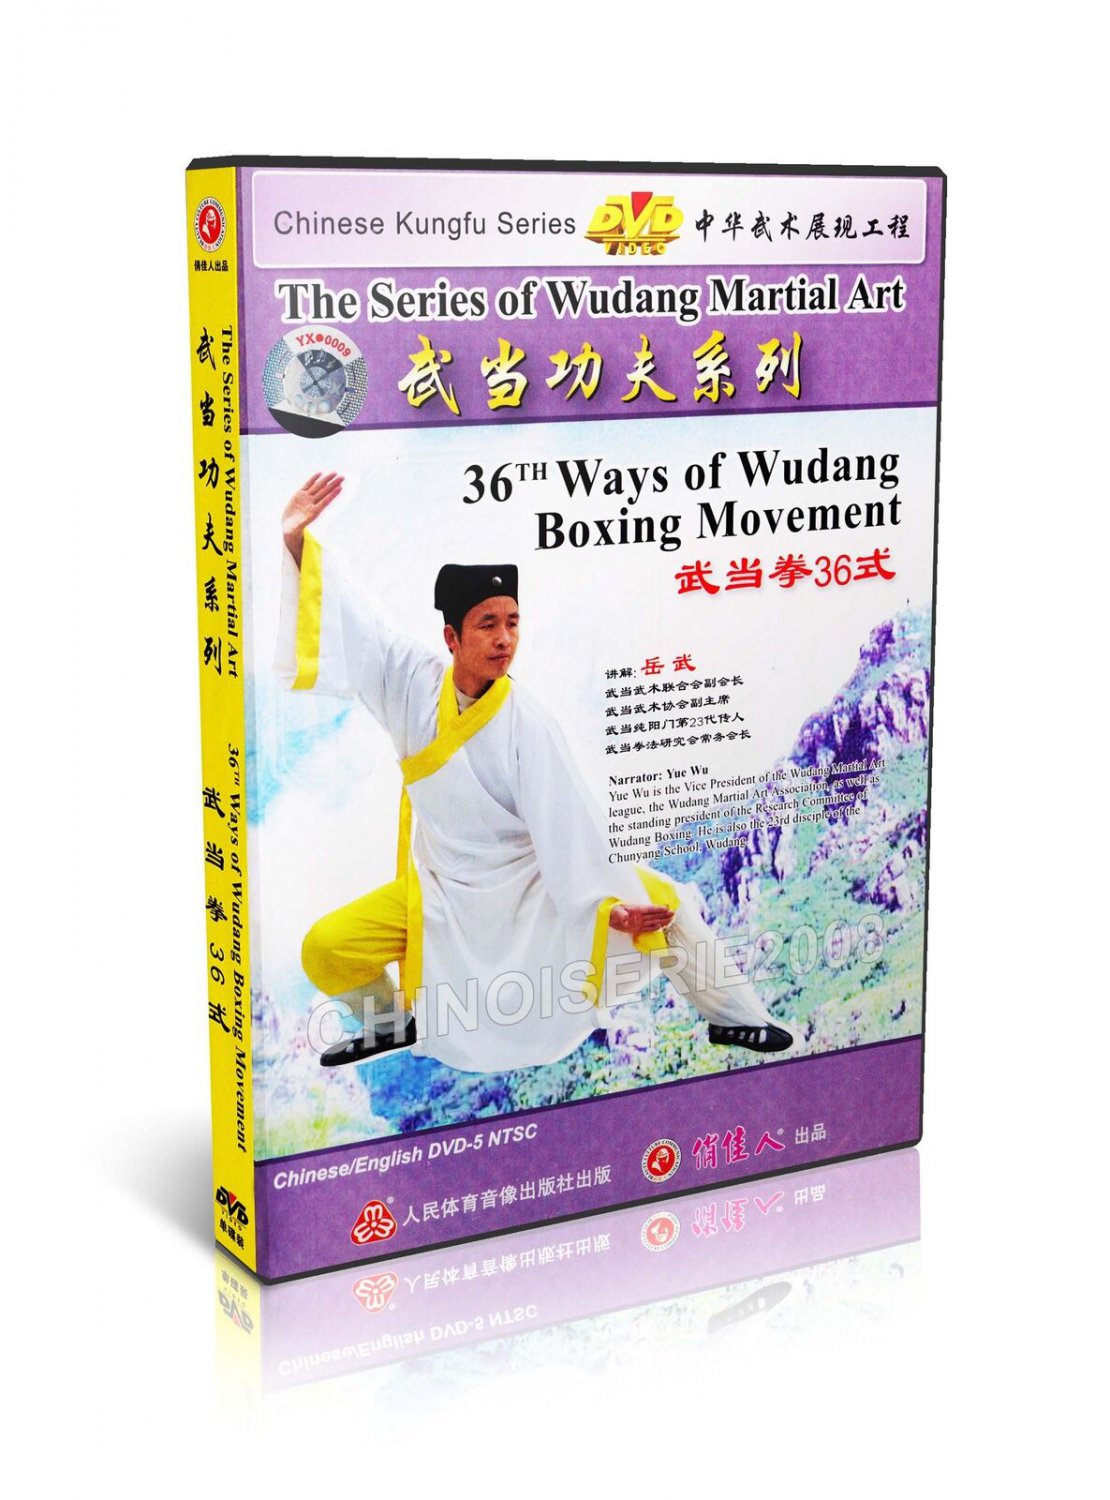 Chinese Kungfu Martial Art 36TH Ways of Wudang Boxing Movement by Yue Wu DVD